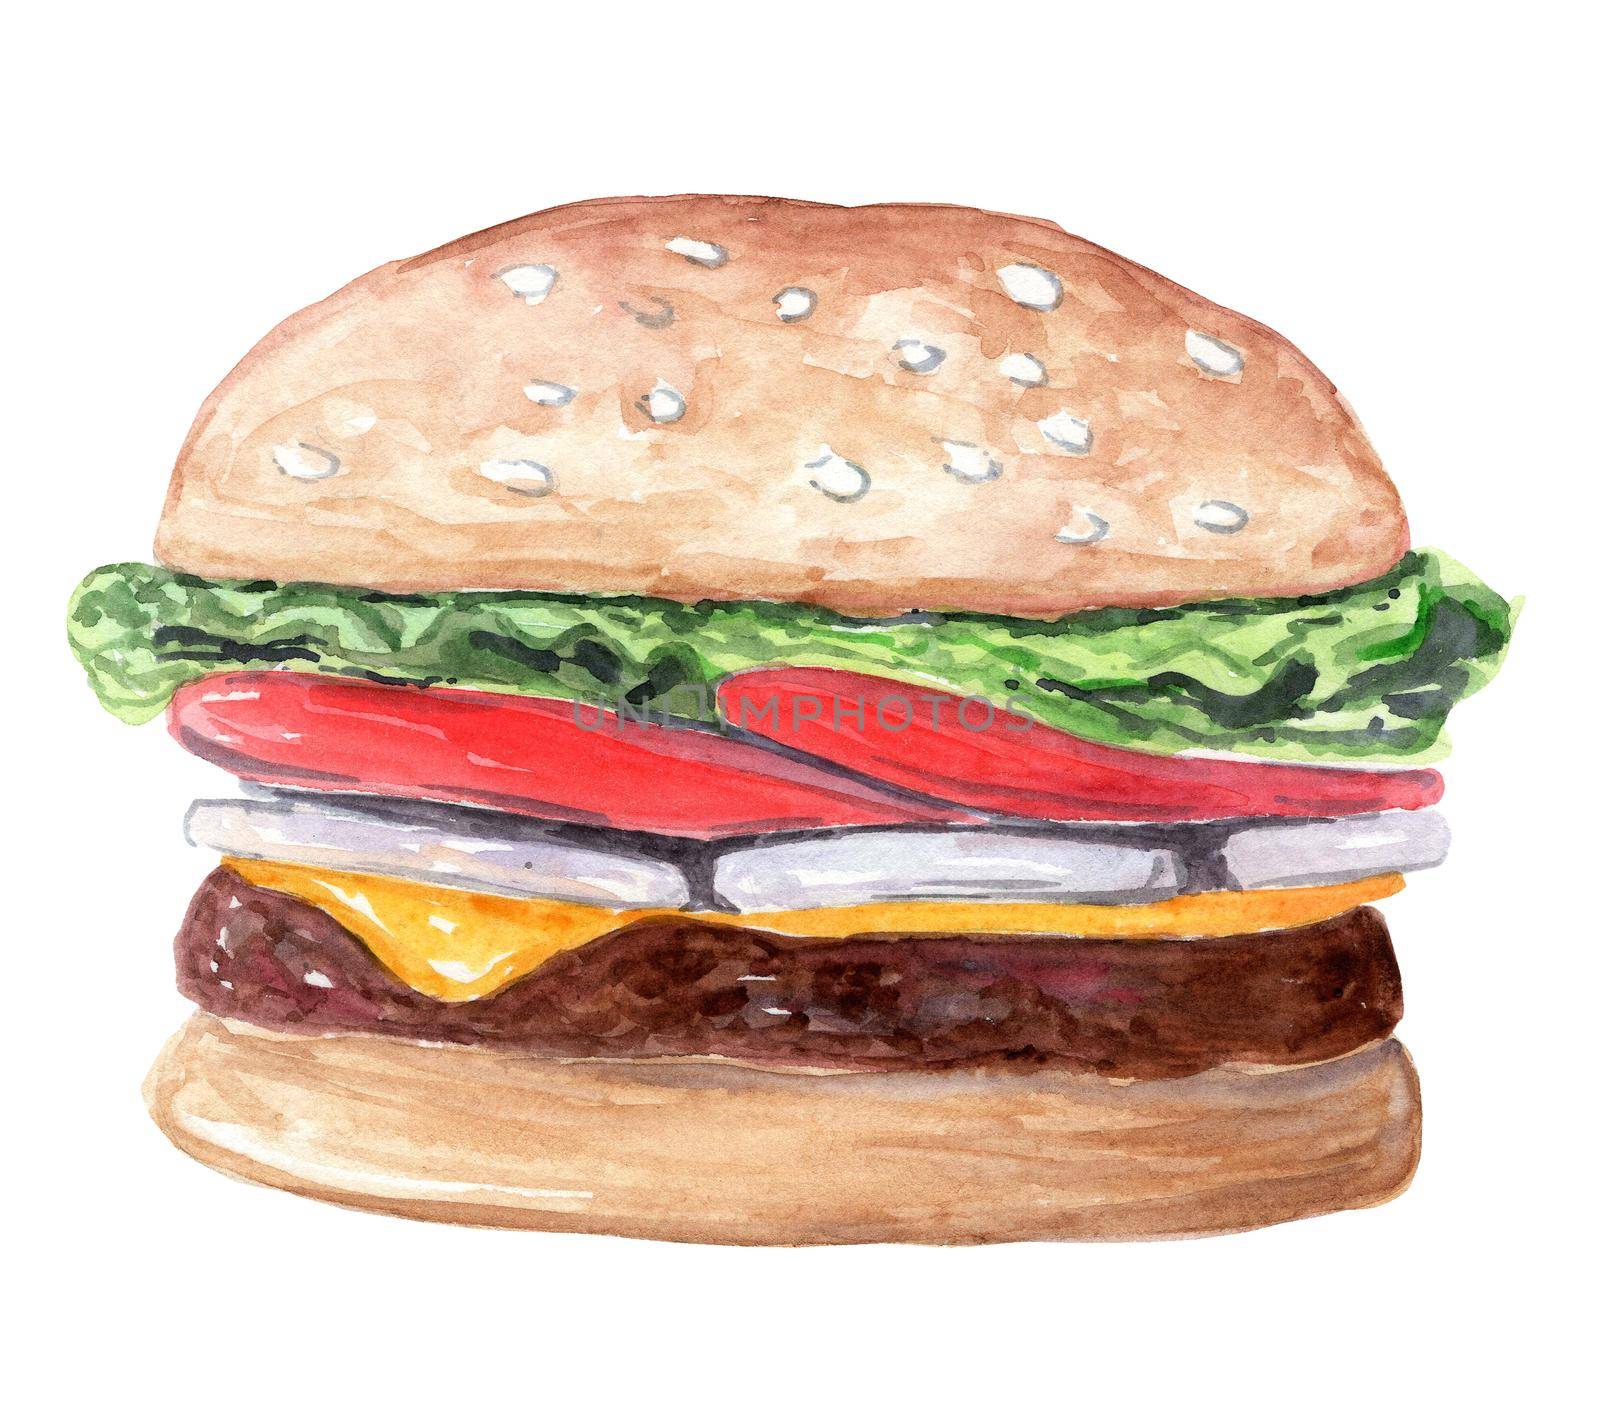 watercolor hand drawn brown burger with salad,tomato,cheese isolated on white background. Fast food illustration for cafe menu by dreamloud